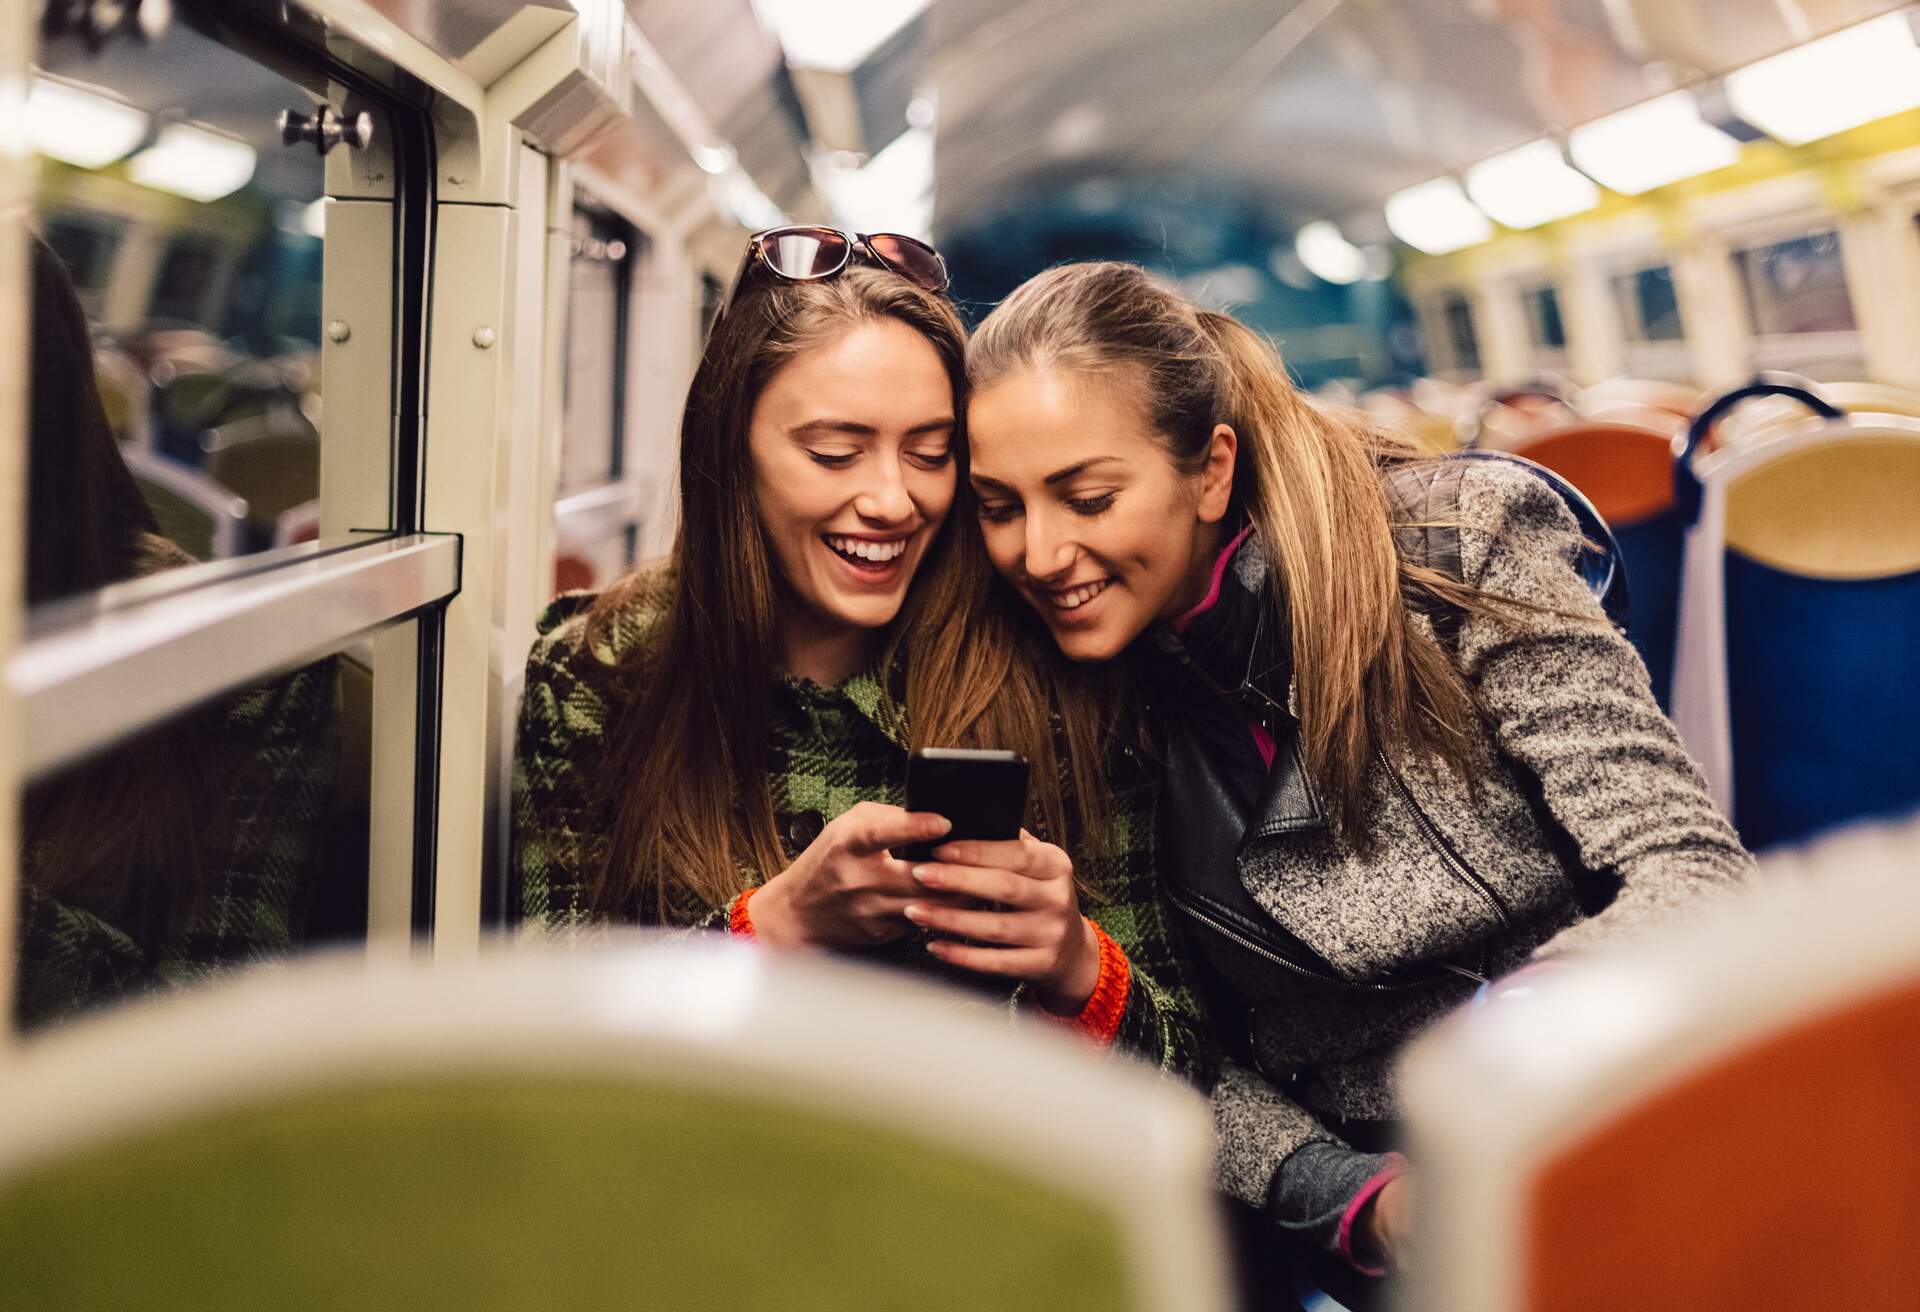 Two happy women sit on a train and look at a mobile phone.